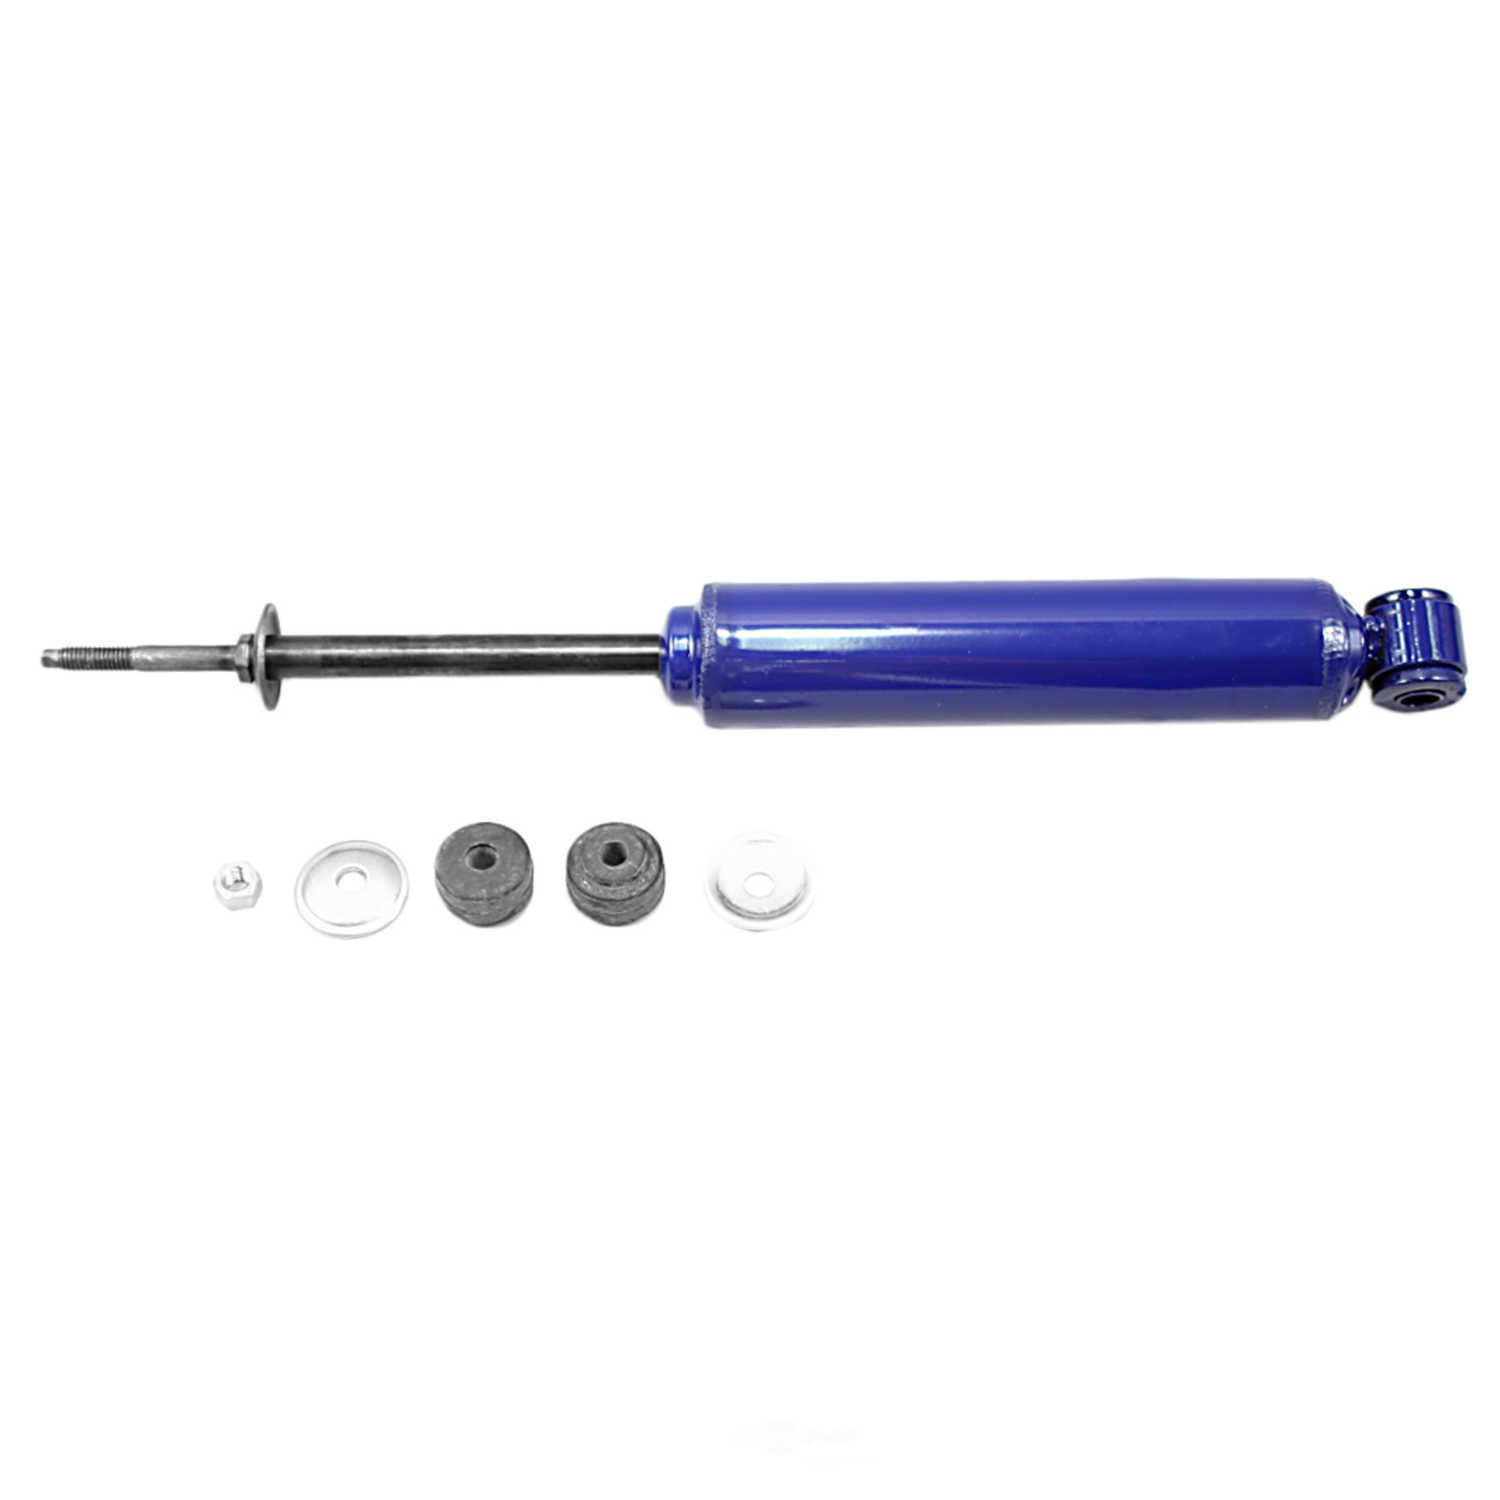 MONROE SHOCKS/STRUTS - Monro-Matic Plus Shock Absorber (With ABS Brakes, Front) - MOE 32075